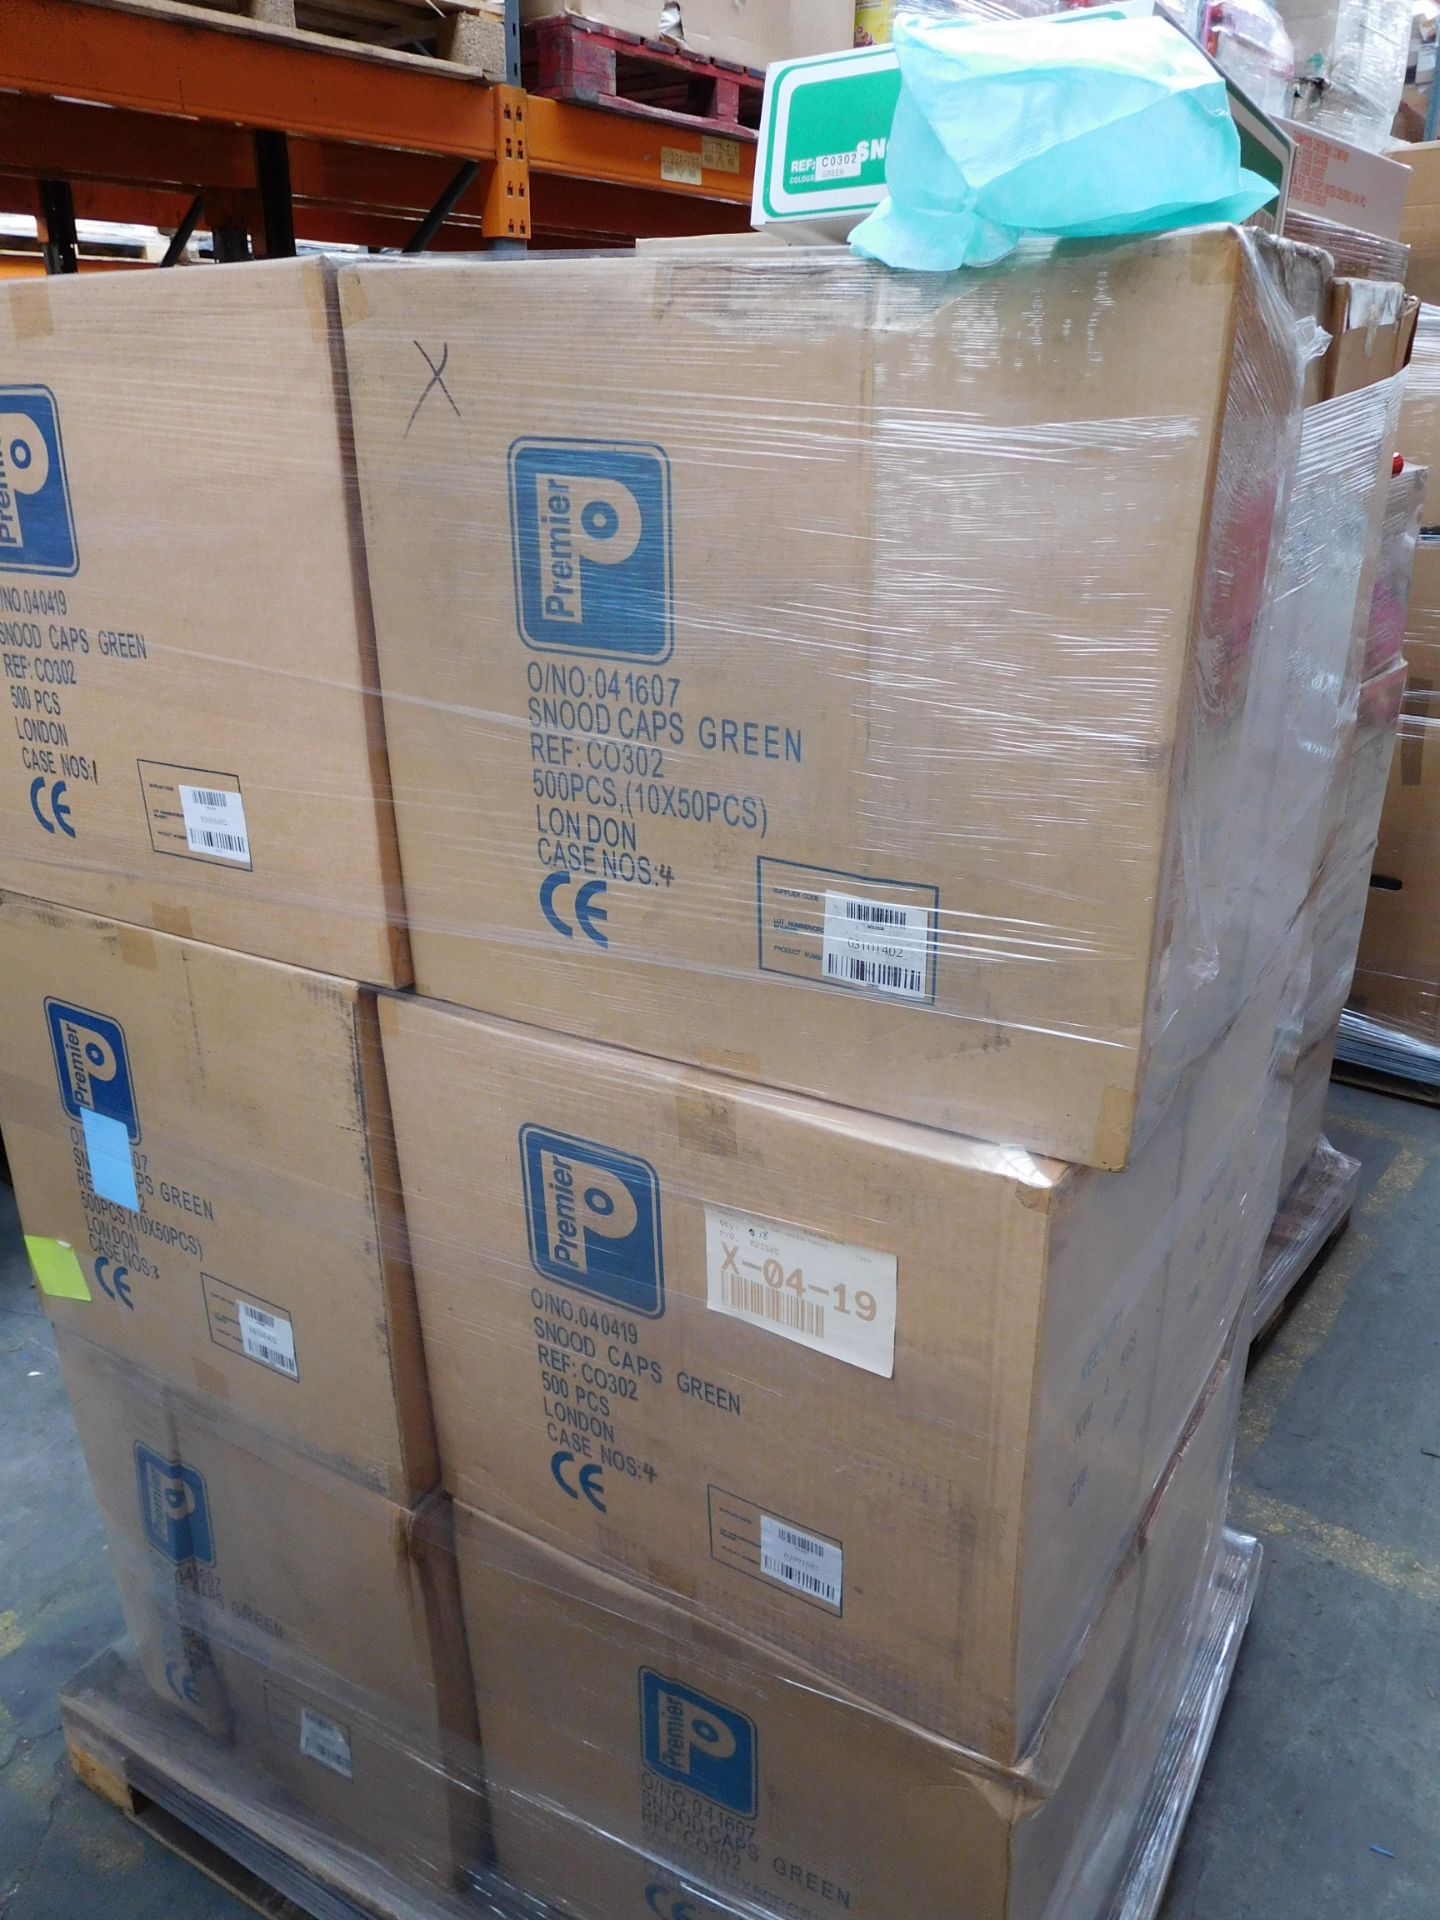 PALLET (C7) TO CONTAIN APPROX. 9,000 x GREEN SNOOD CAPS. BRAND NEW STOCK. VERY HIGH RETAIL VALUE. - Image 2 of 2